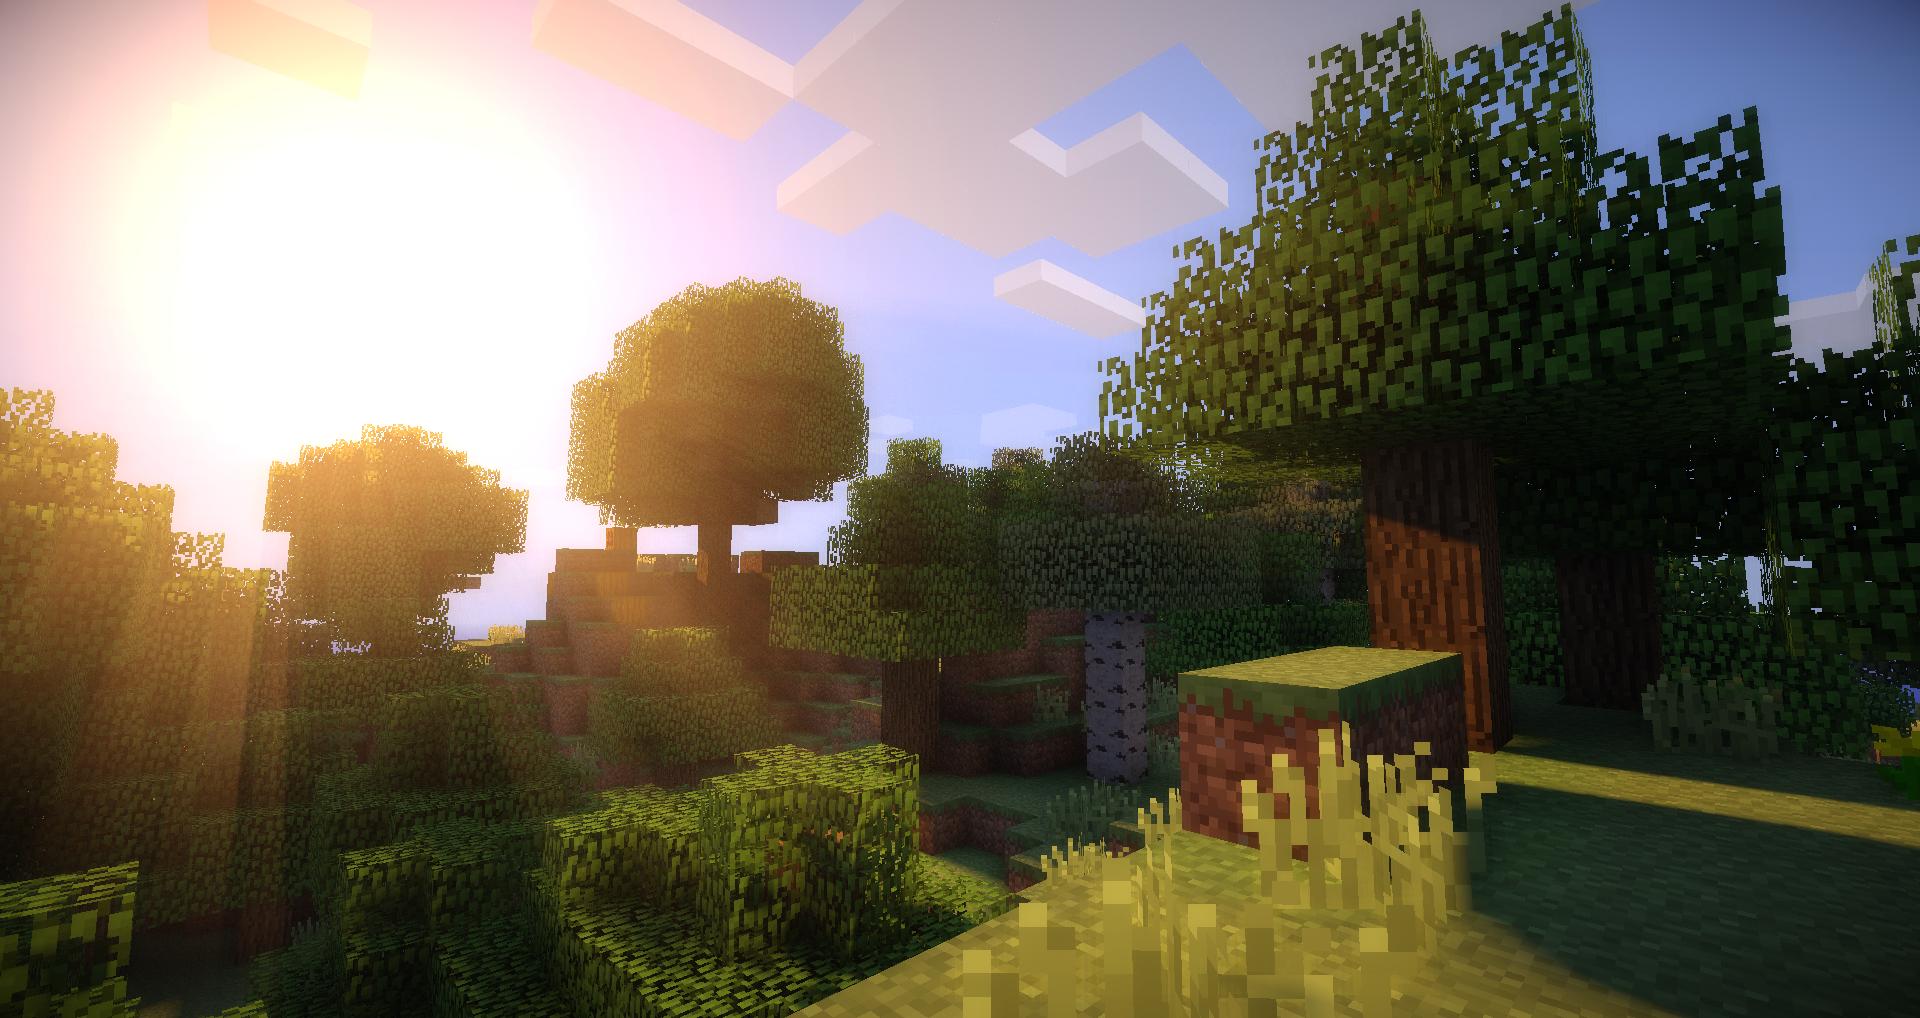 Free download Backgroundi want a shadded minecraft sunrise with trees and hill [1920x1018] for your Desktop, Mobile & Tablet. Explore Make Your Minecraft Wallpaper. Make Your Own Minecraft Wallpaper